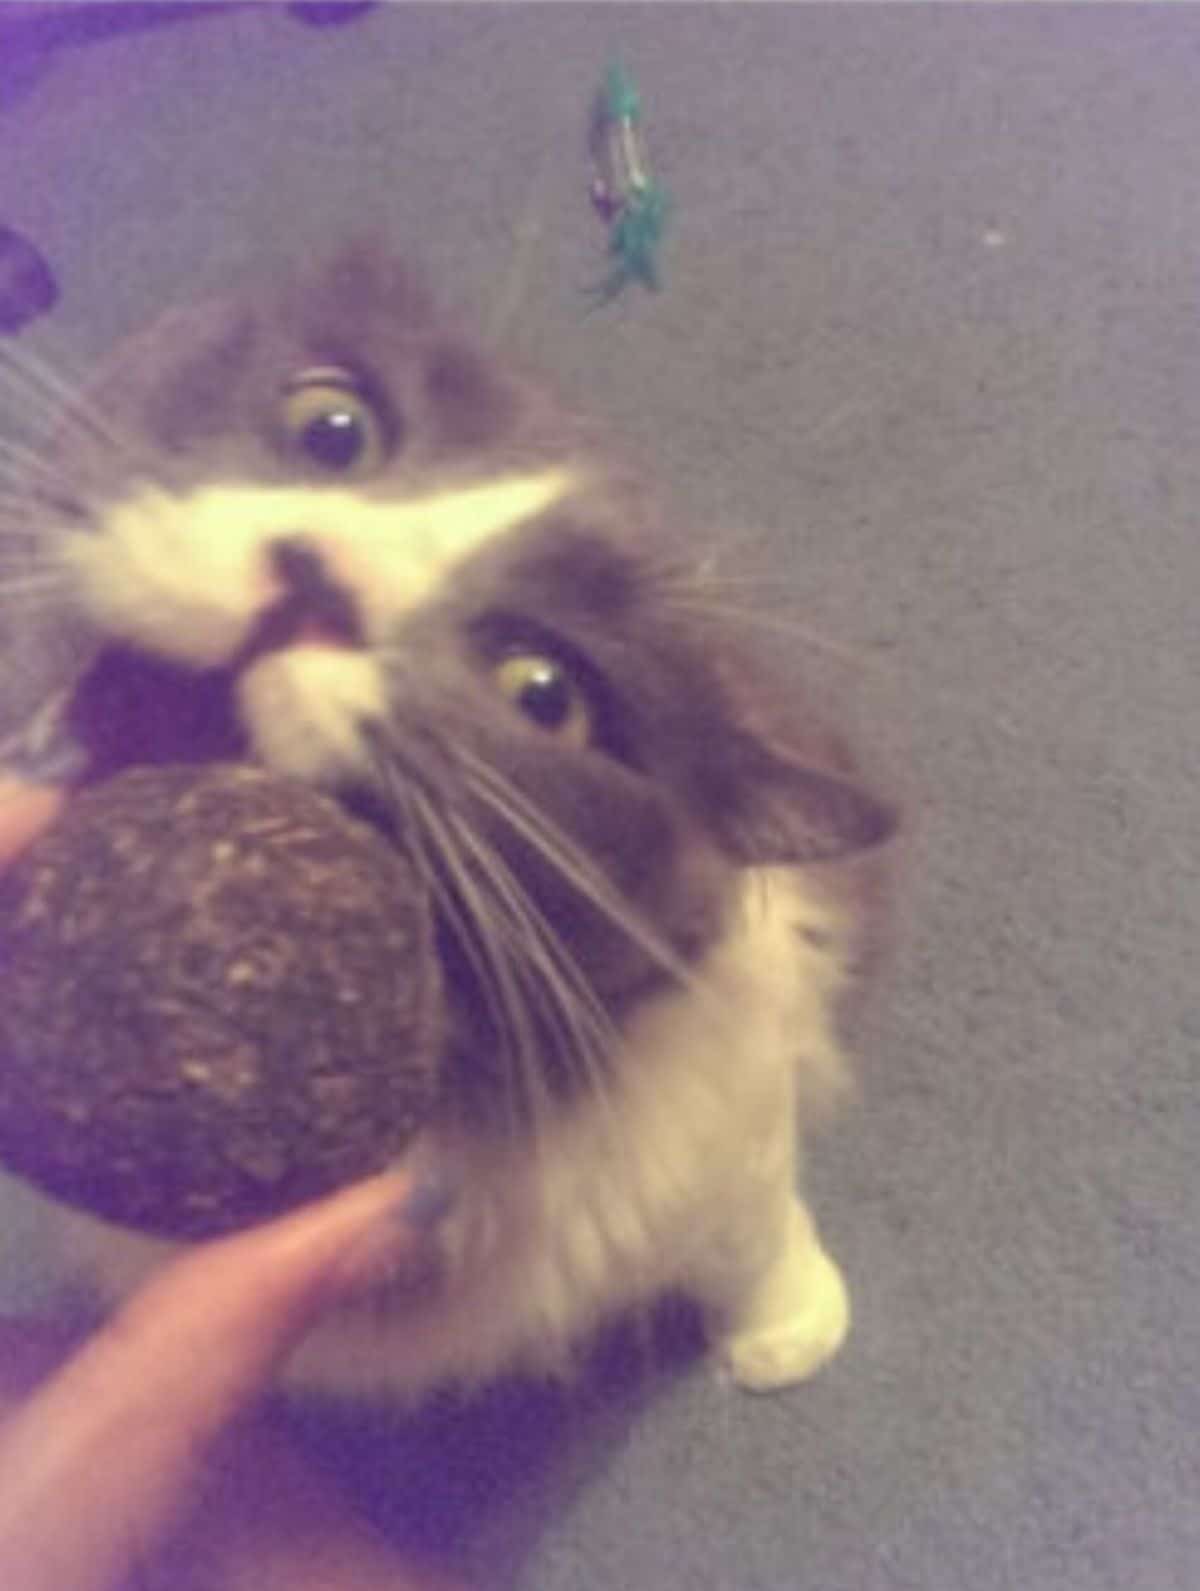 grey and white cat biting into a catnip ball